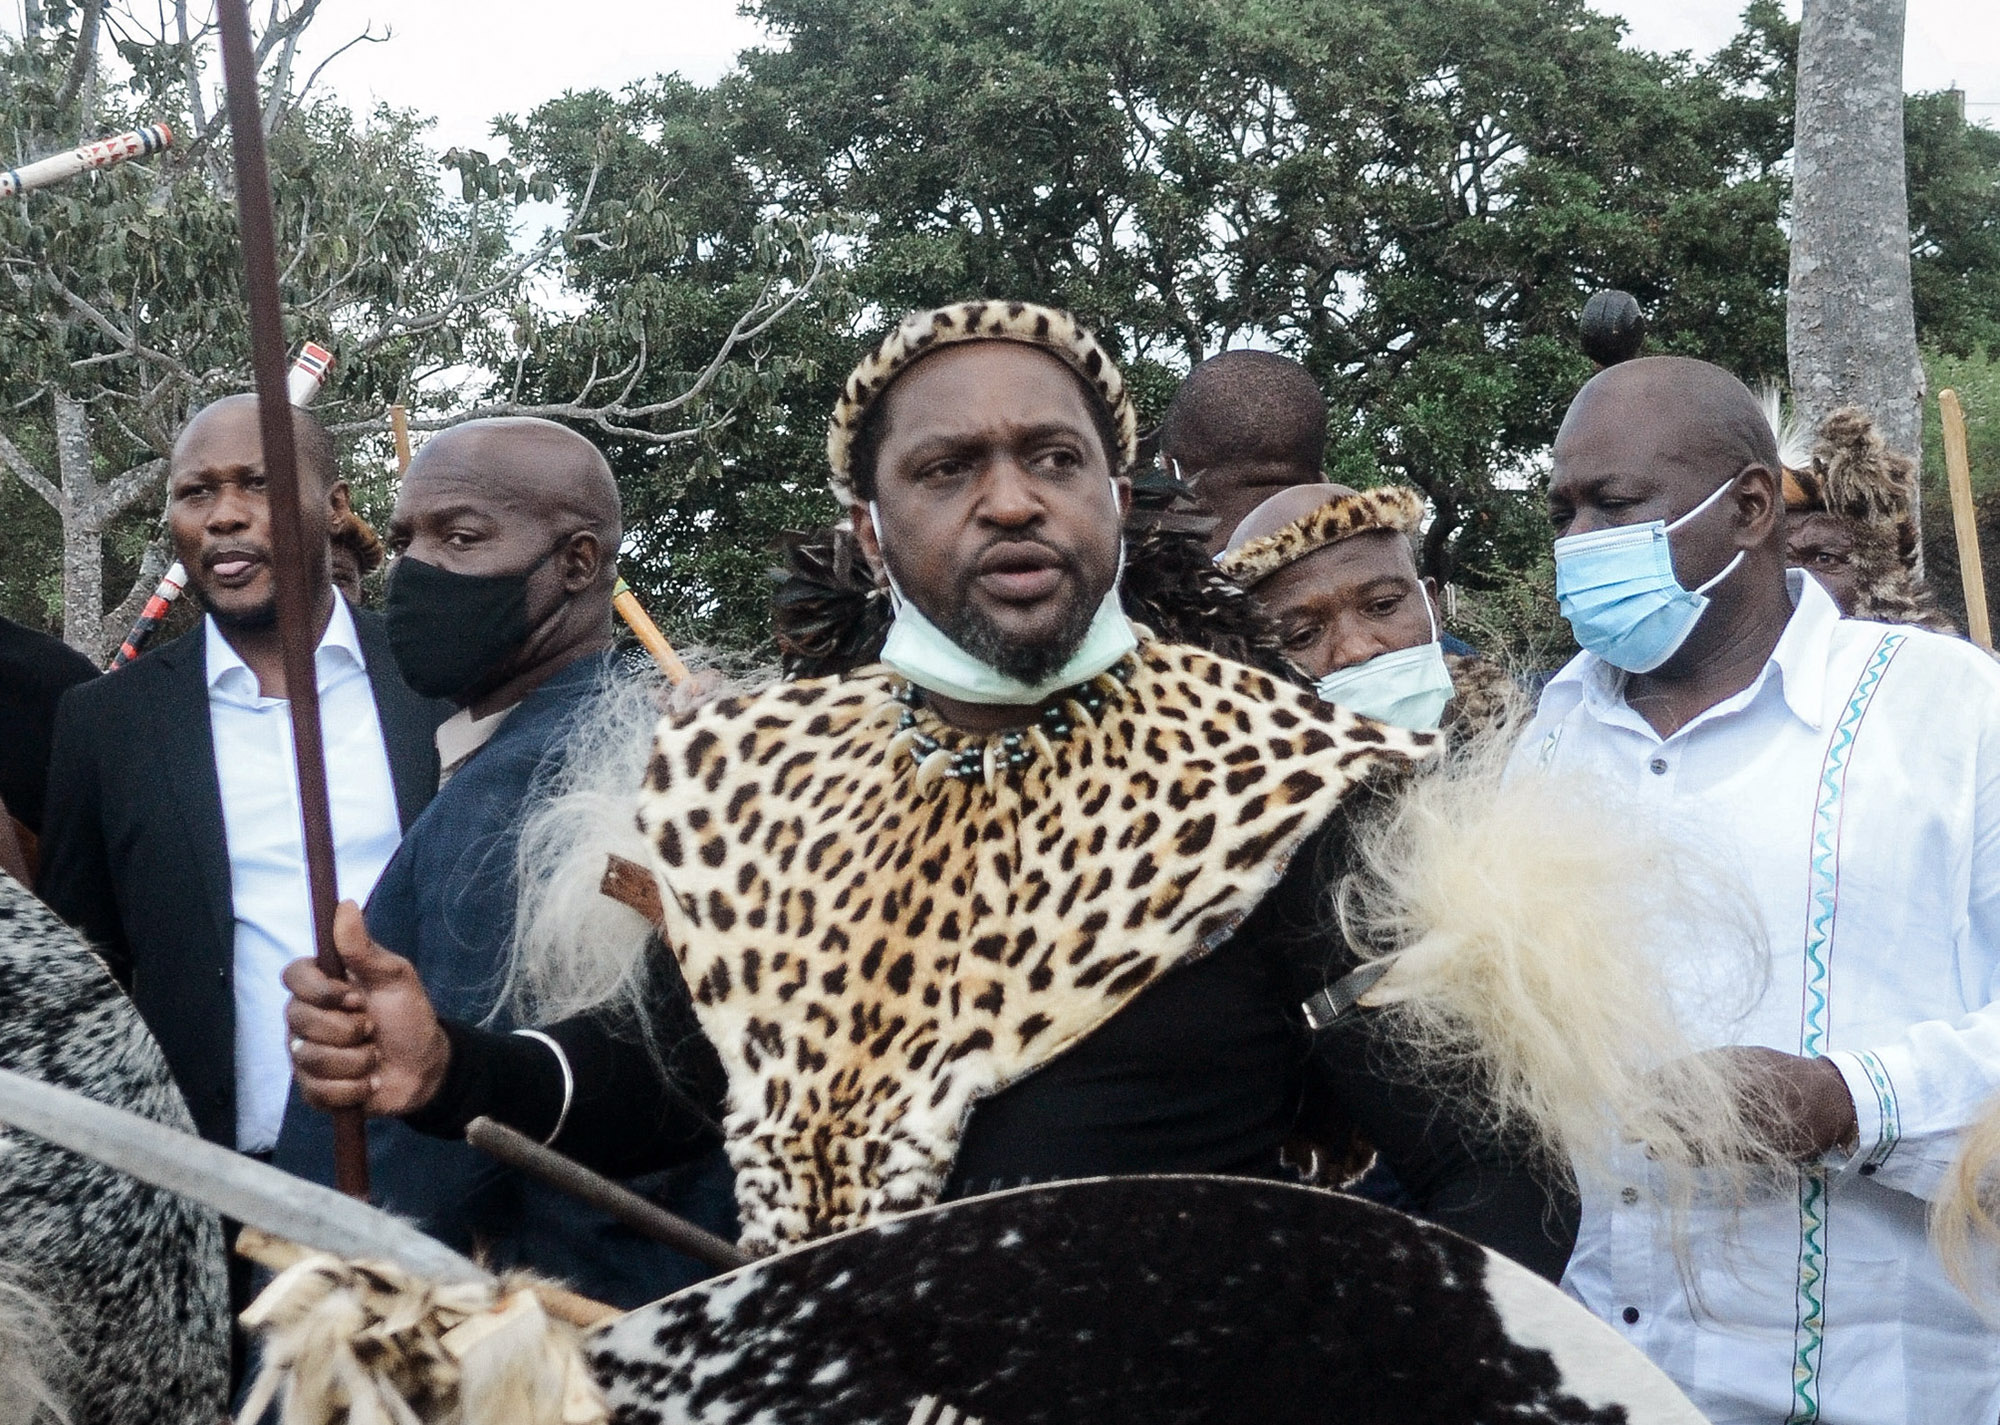 South Africa's Royal Scandal: New Zulu King's Claim Disputed